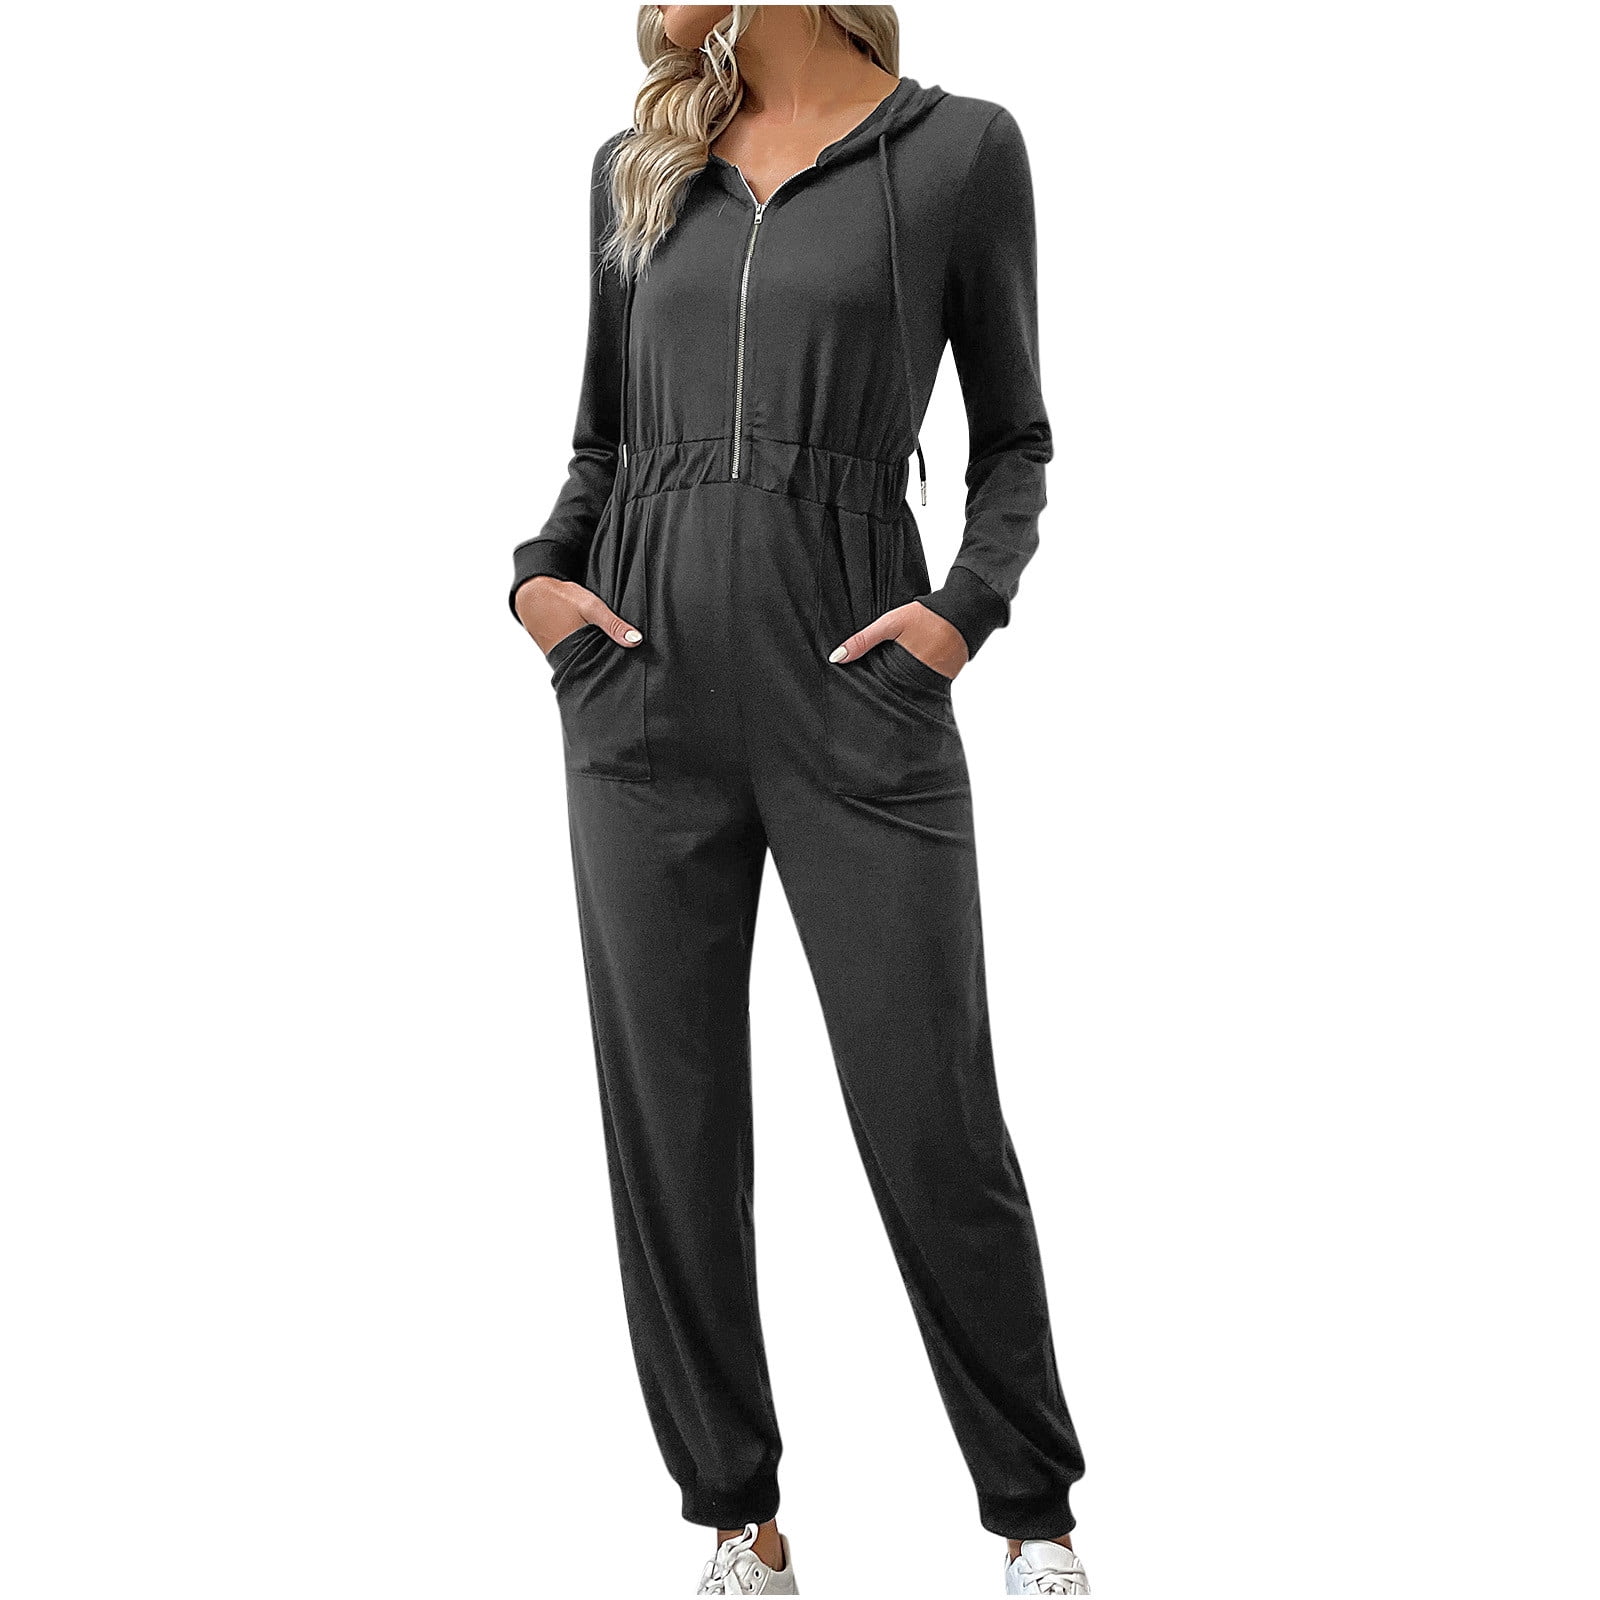 Aunavey Womens Jogging Suits Sets Running Outfit Zipper Warm Up 2